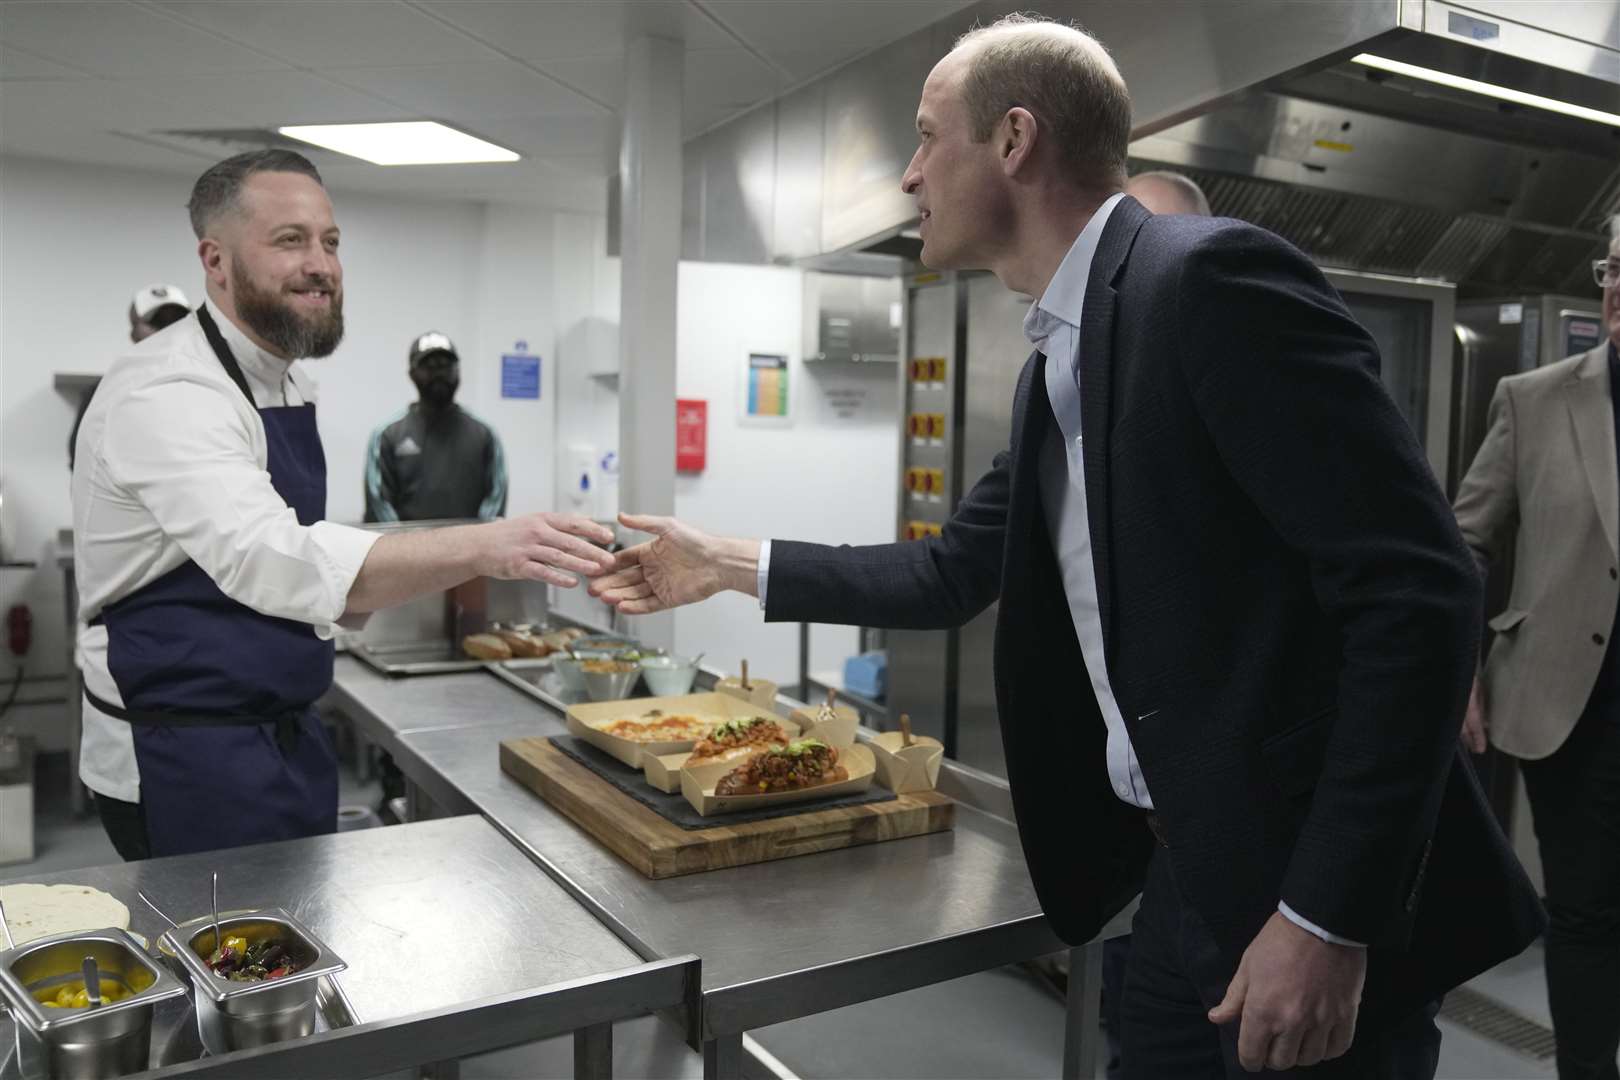 The Prince of Wales (right) shakes hands with a chef who has prepared food in seaweed-based food containers made by Earthshot 2022 winner Notpla, during a visit to the Kia Oval Cricket Ground (Kin Cheung/PA)